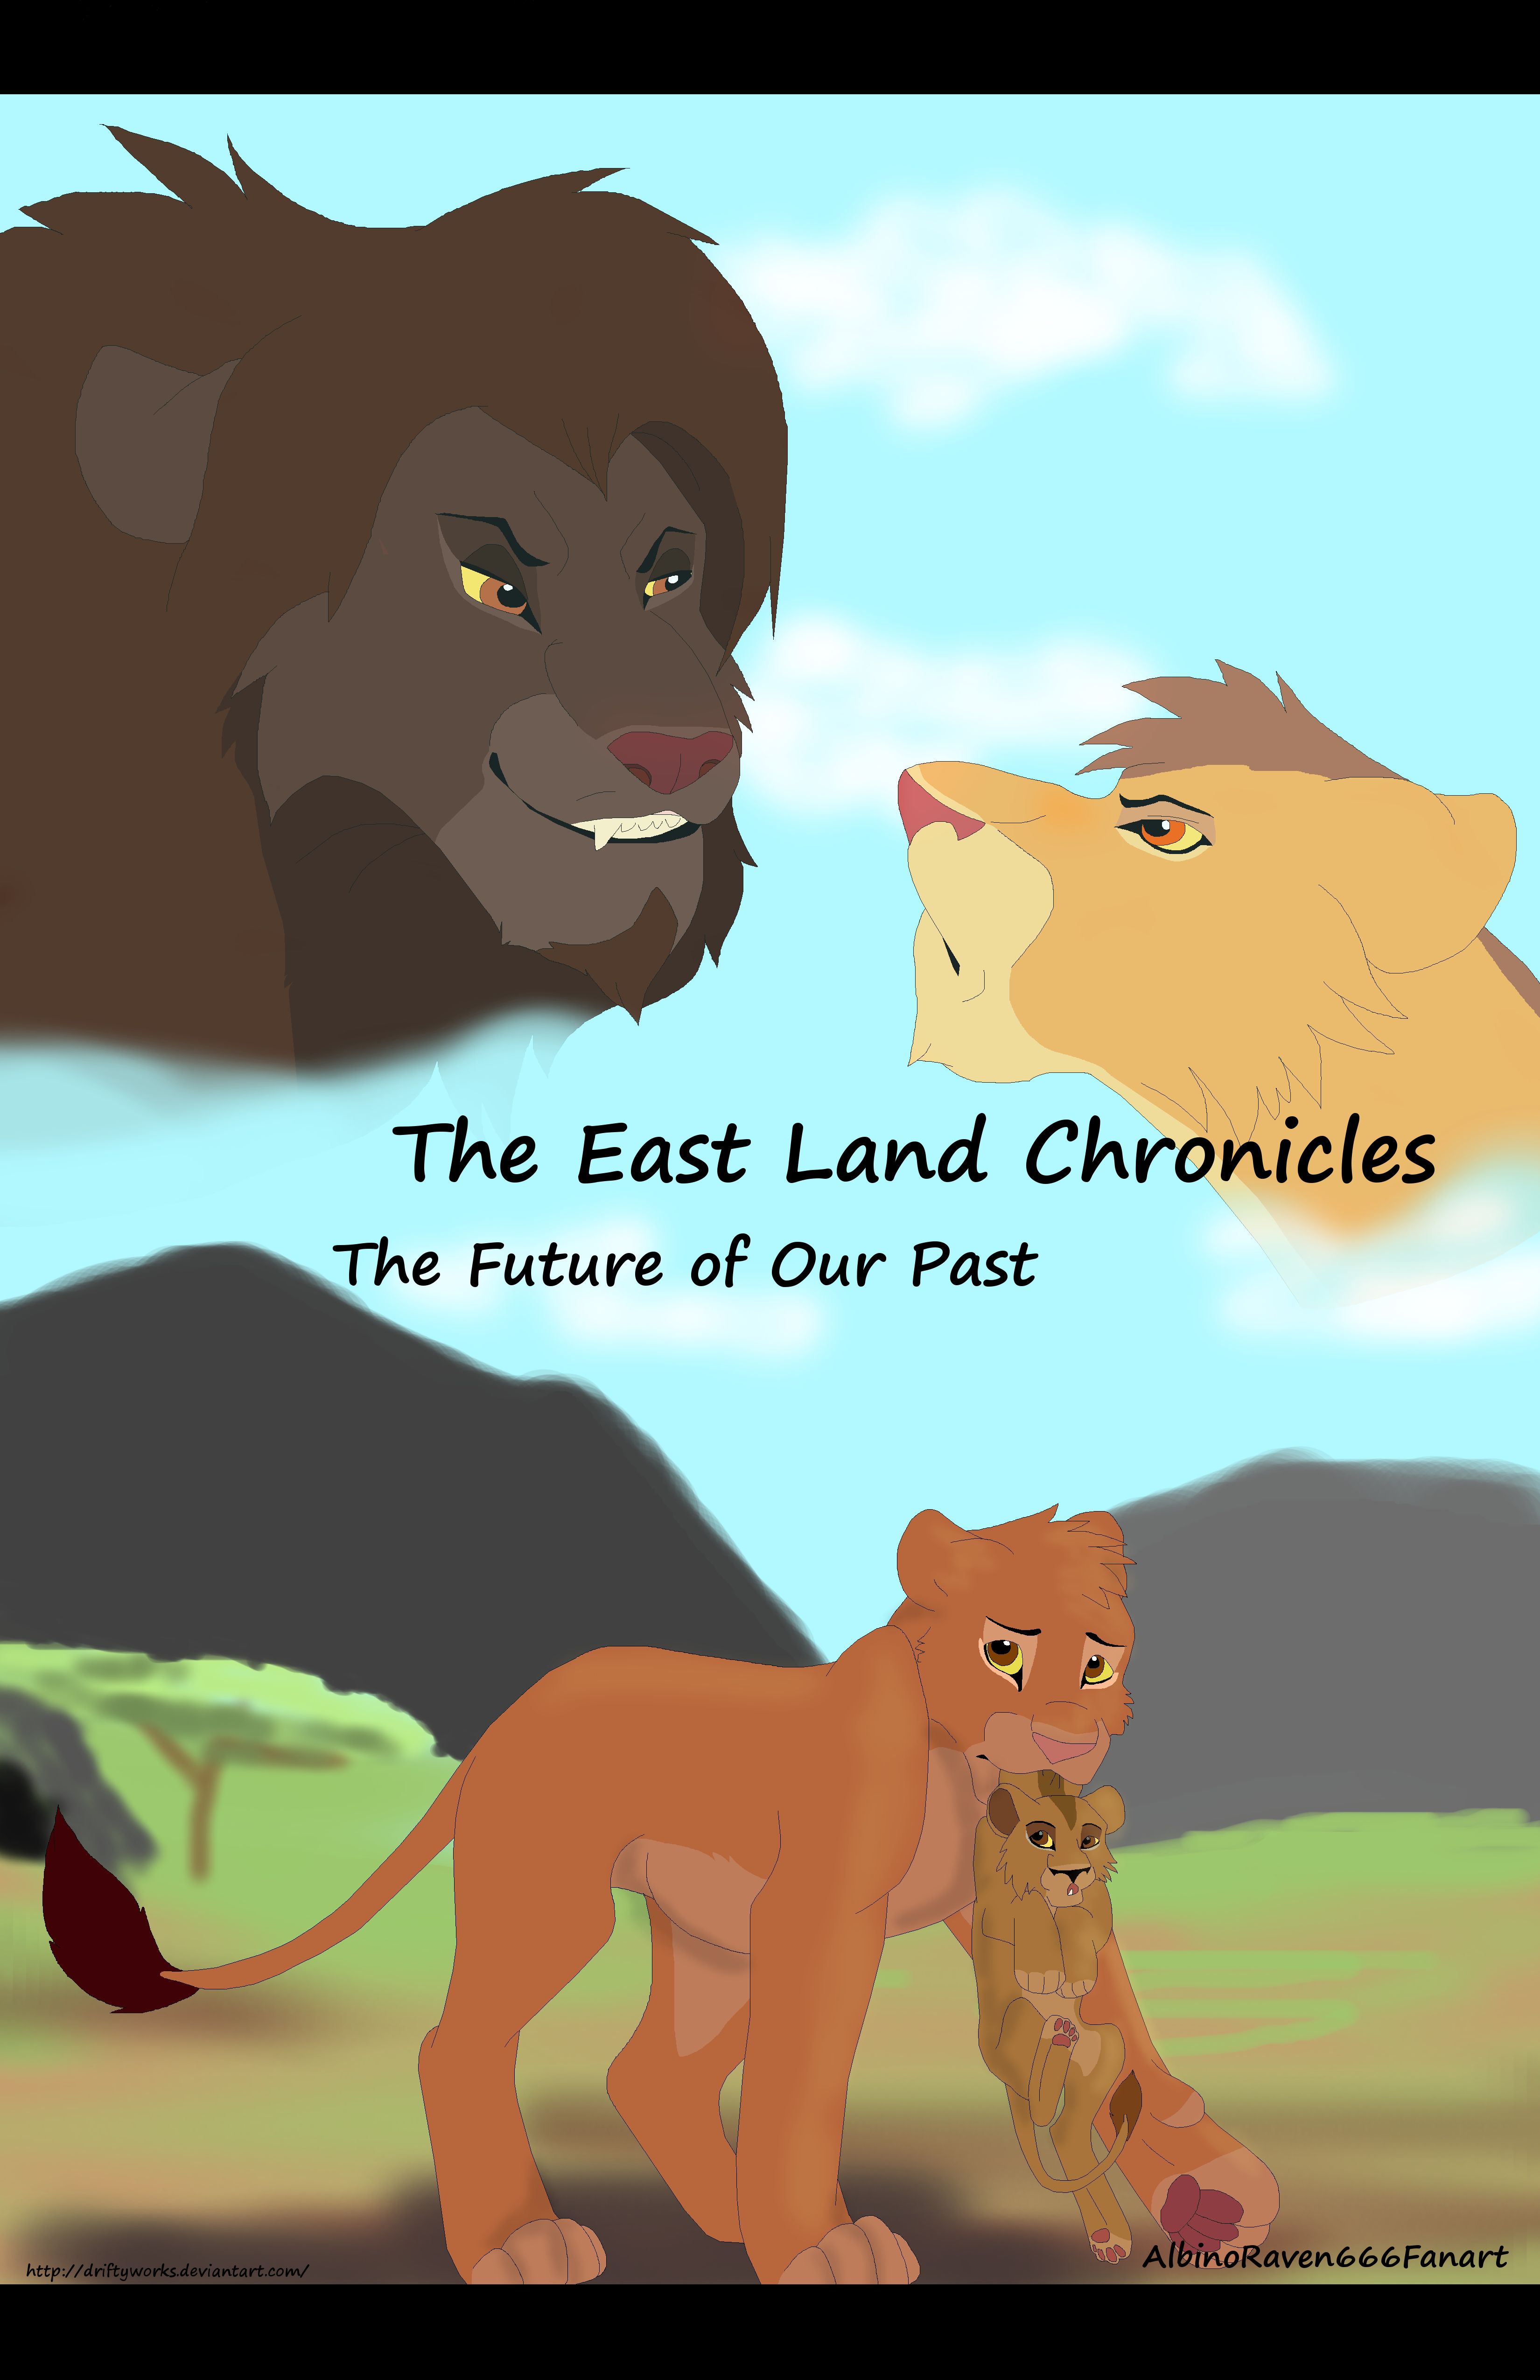 East Land Chronicles Cover Contest Submission